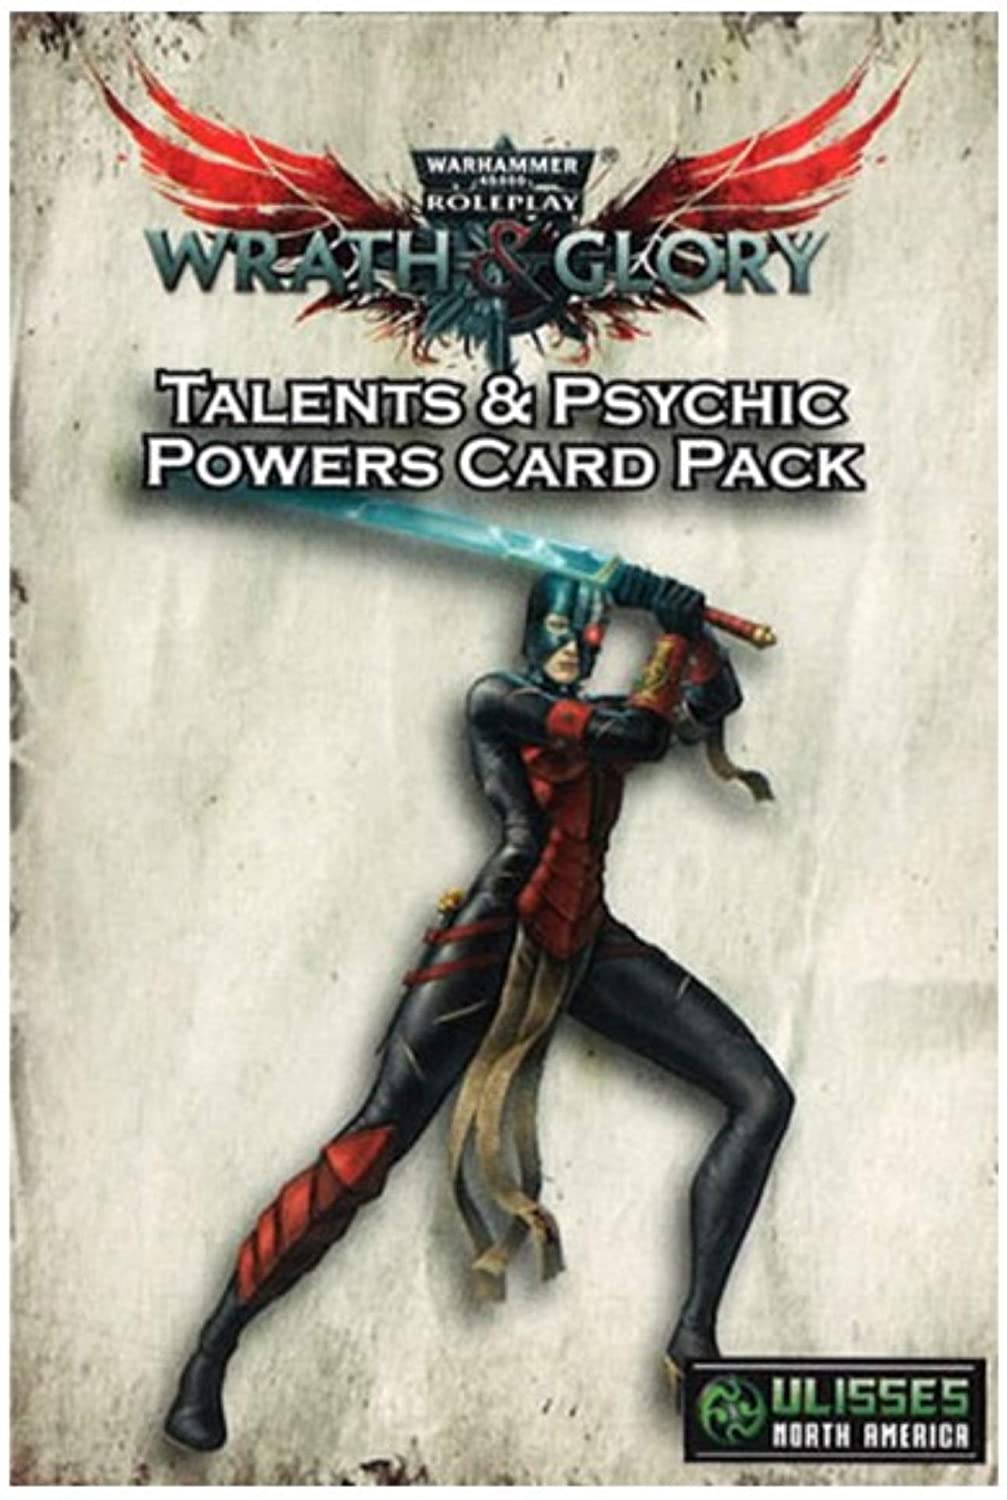 Warhammer 40k Wrath & Glory : Talents & Psychic Powers Card Pack